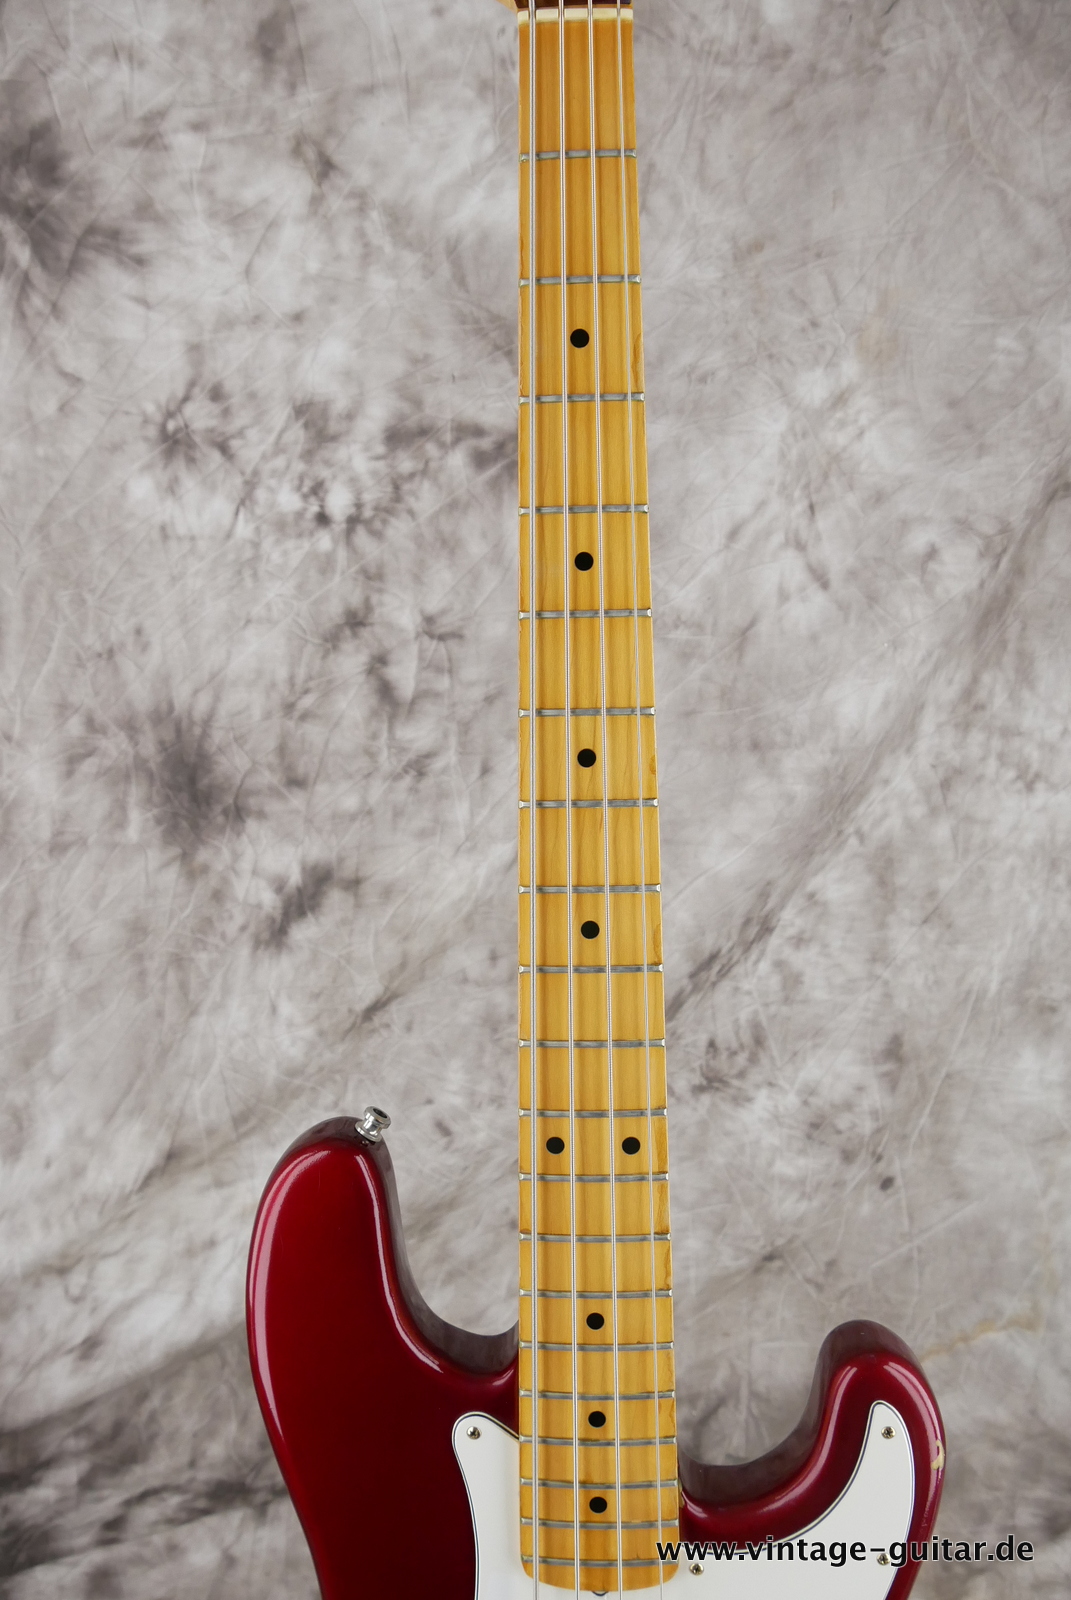 Fender_Precision_Special_USA_candy_apple_red_1982-011.JPG